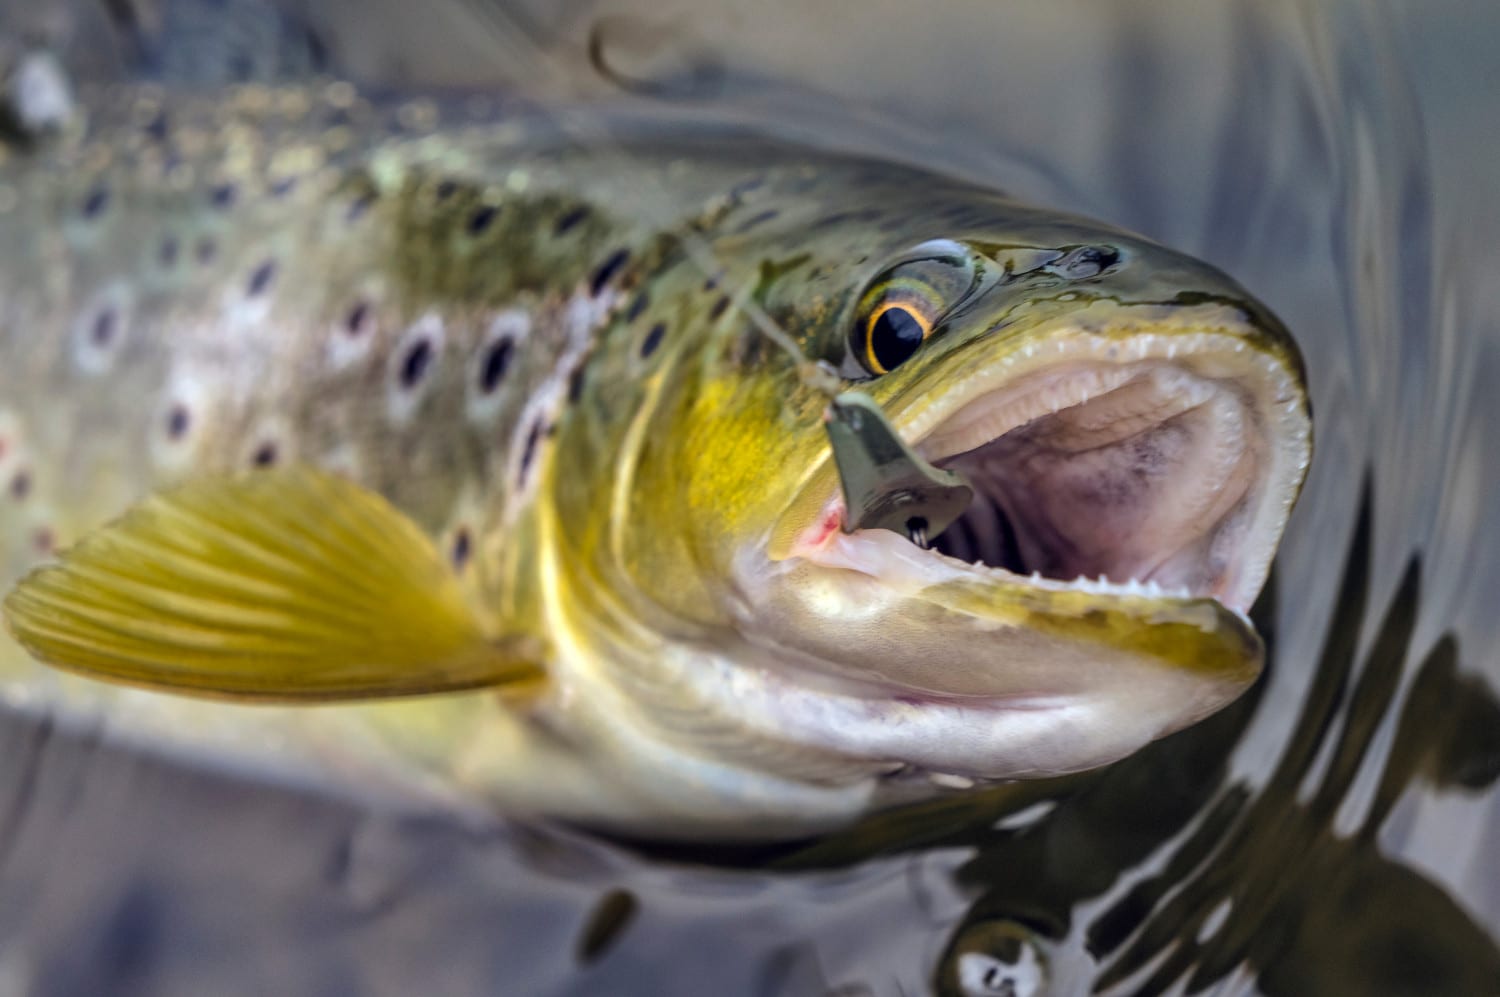 braid/leader brands and sizes for smallish shallow stream trout